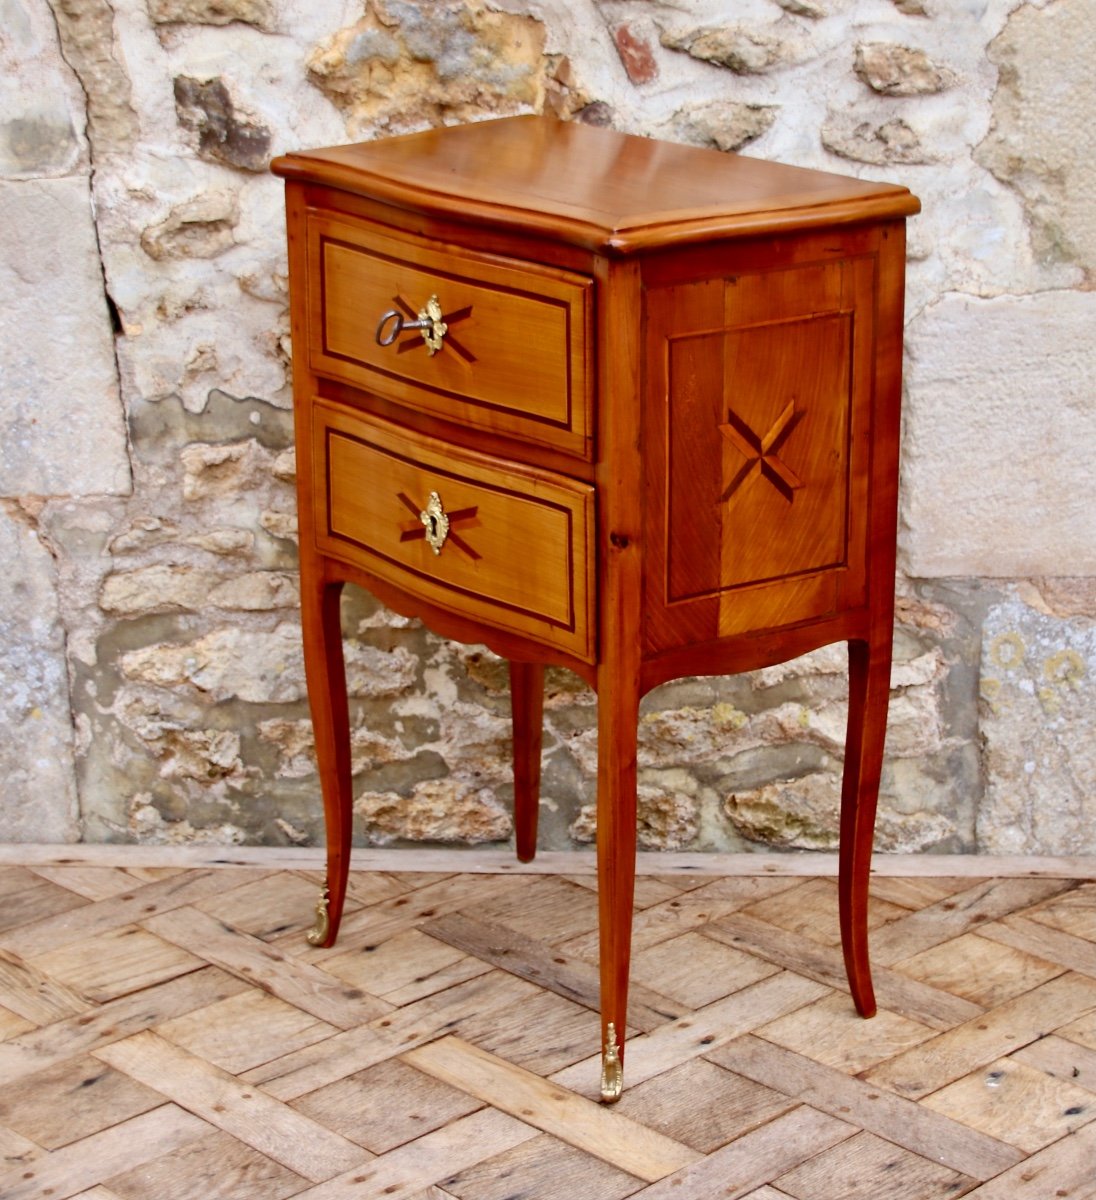 18th Century Curved Jumping Chest Of Drawers In Cherry